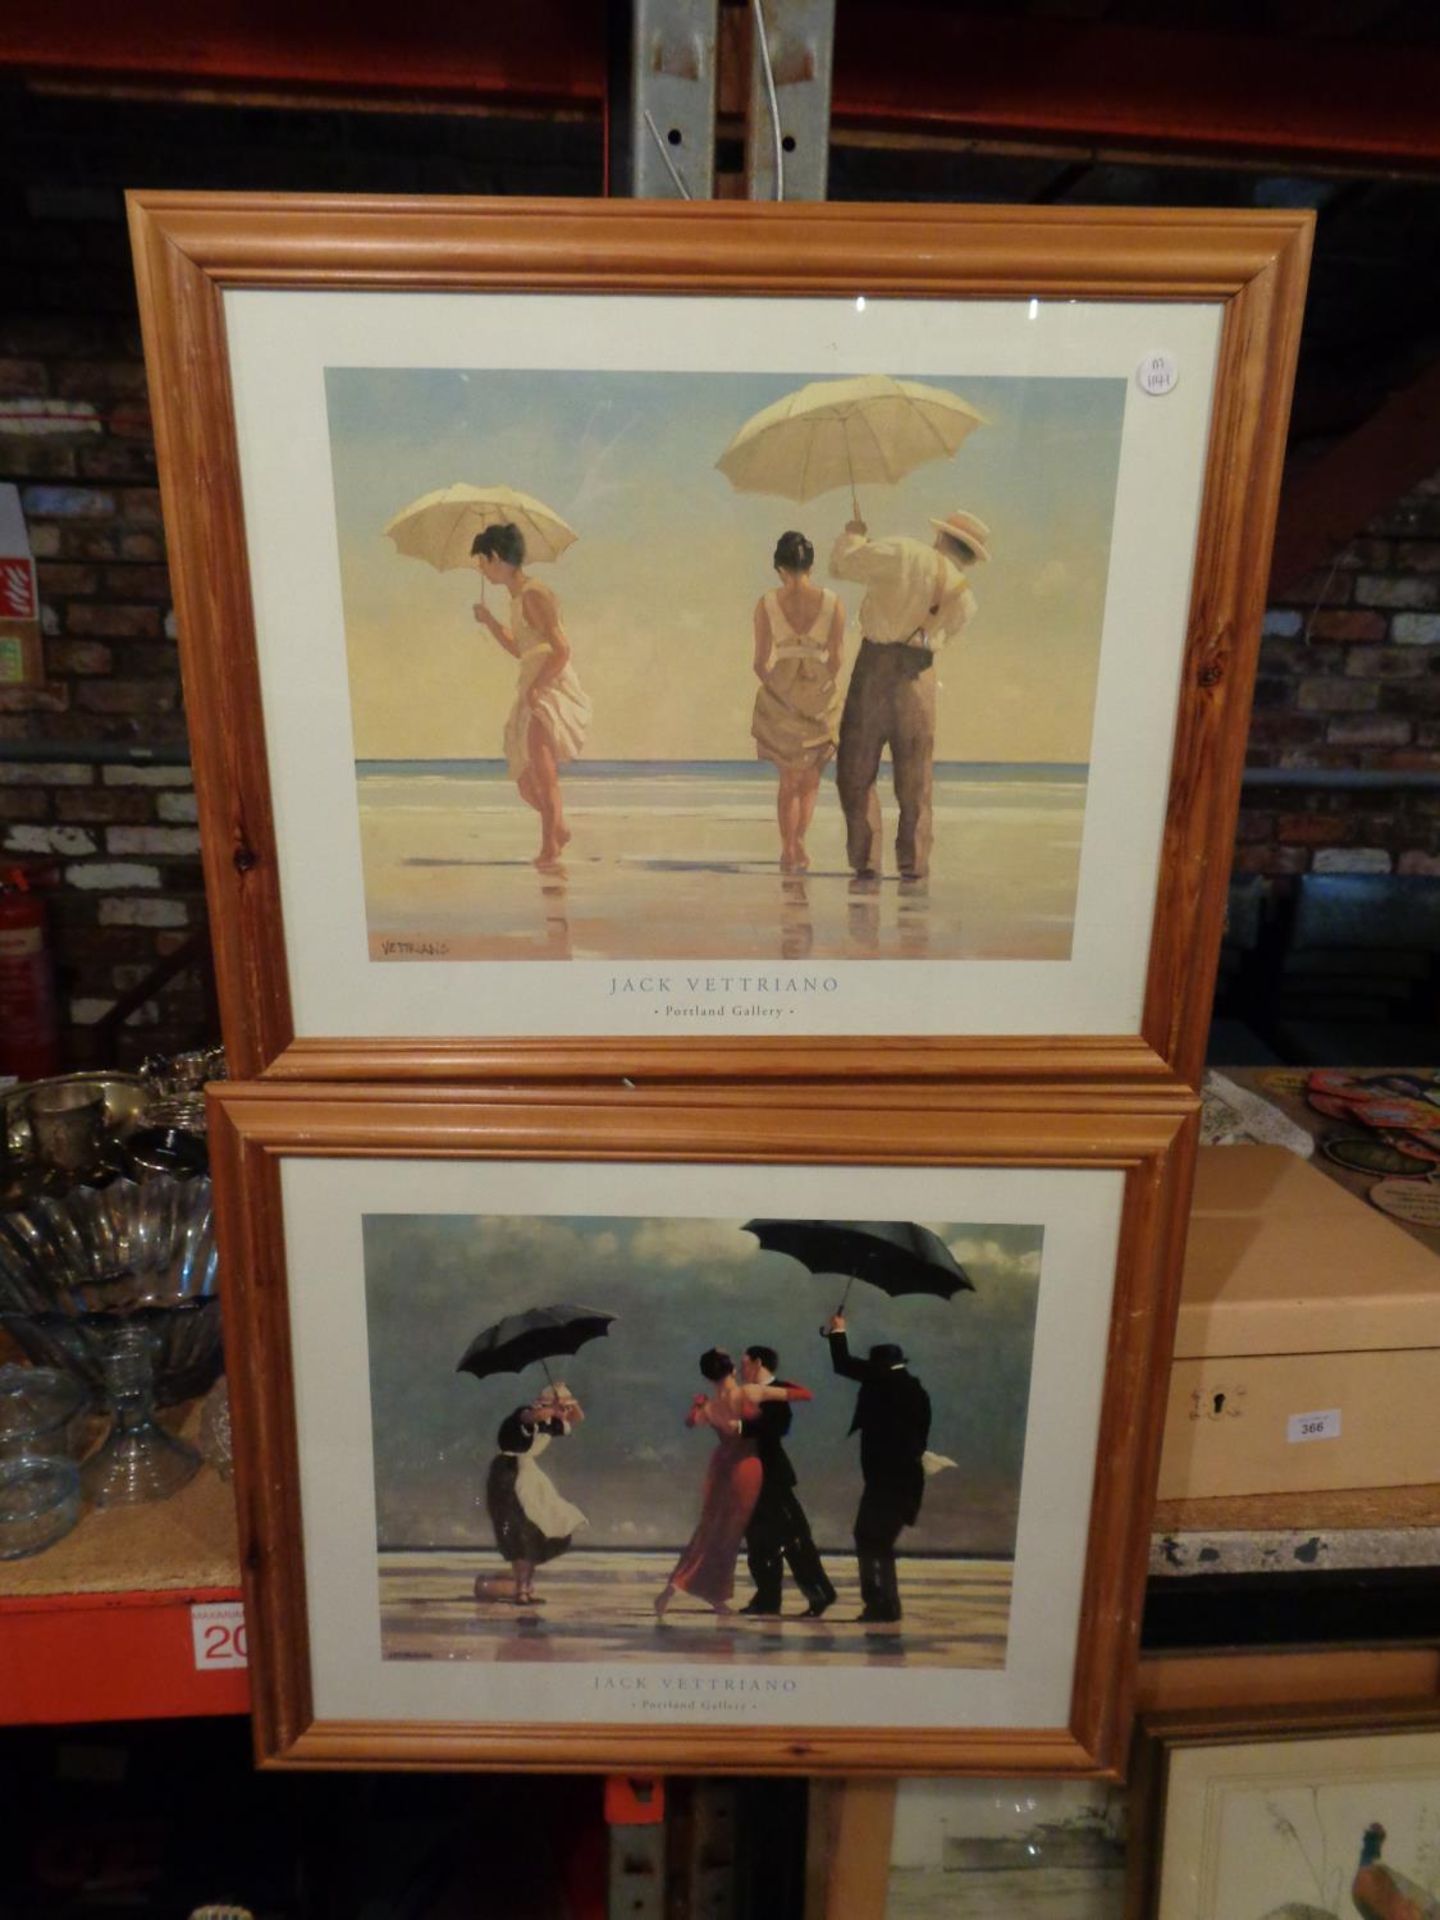 TWO FRAMED PRINTS BY JACK VETTRIANO DEPICTING SCENES OF PEOPLE DANCING ON A BEACH